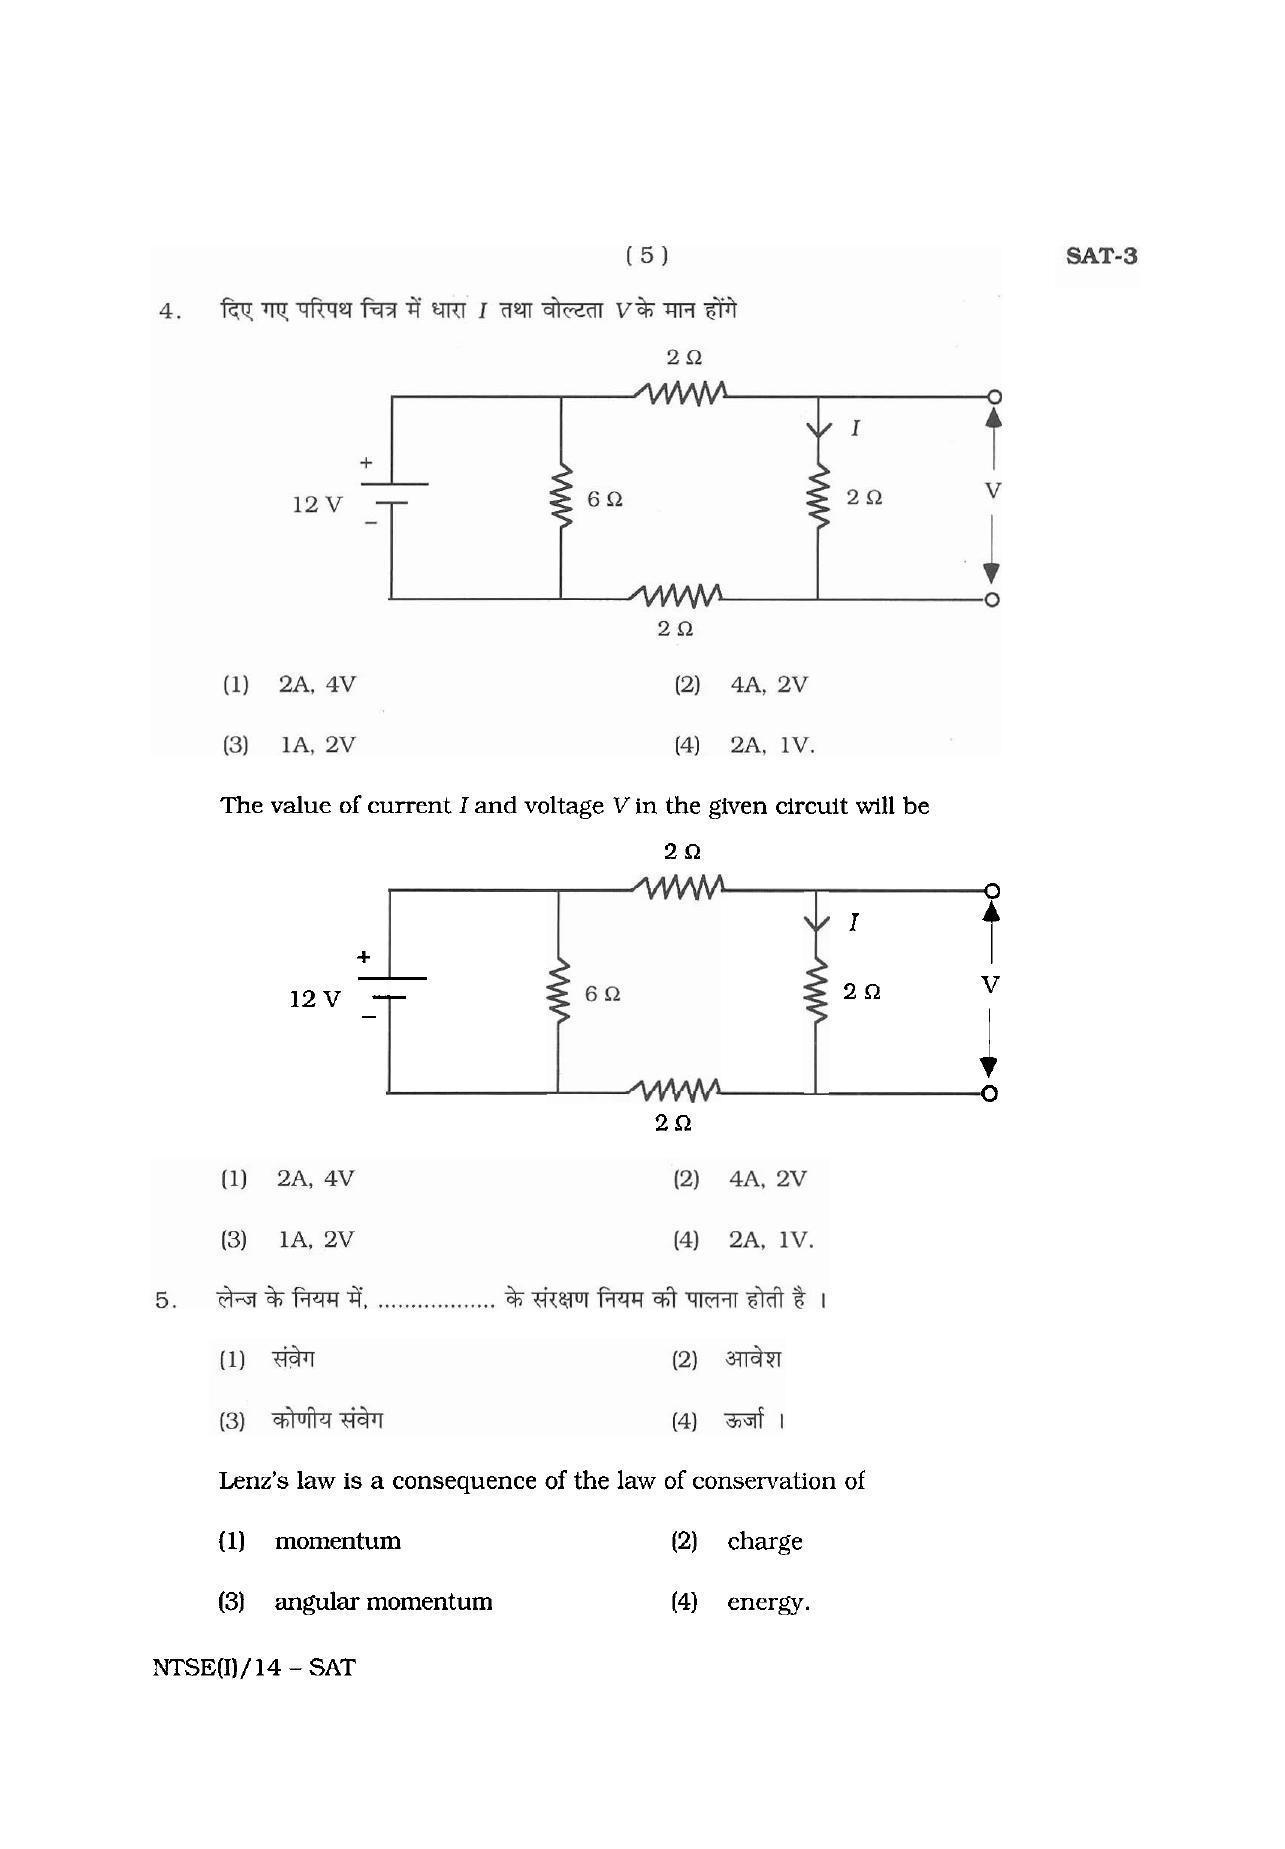 NTSE 2014 (Stage II) SAT Question Paper - Page 5